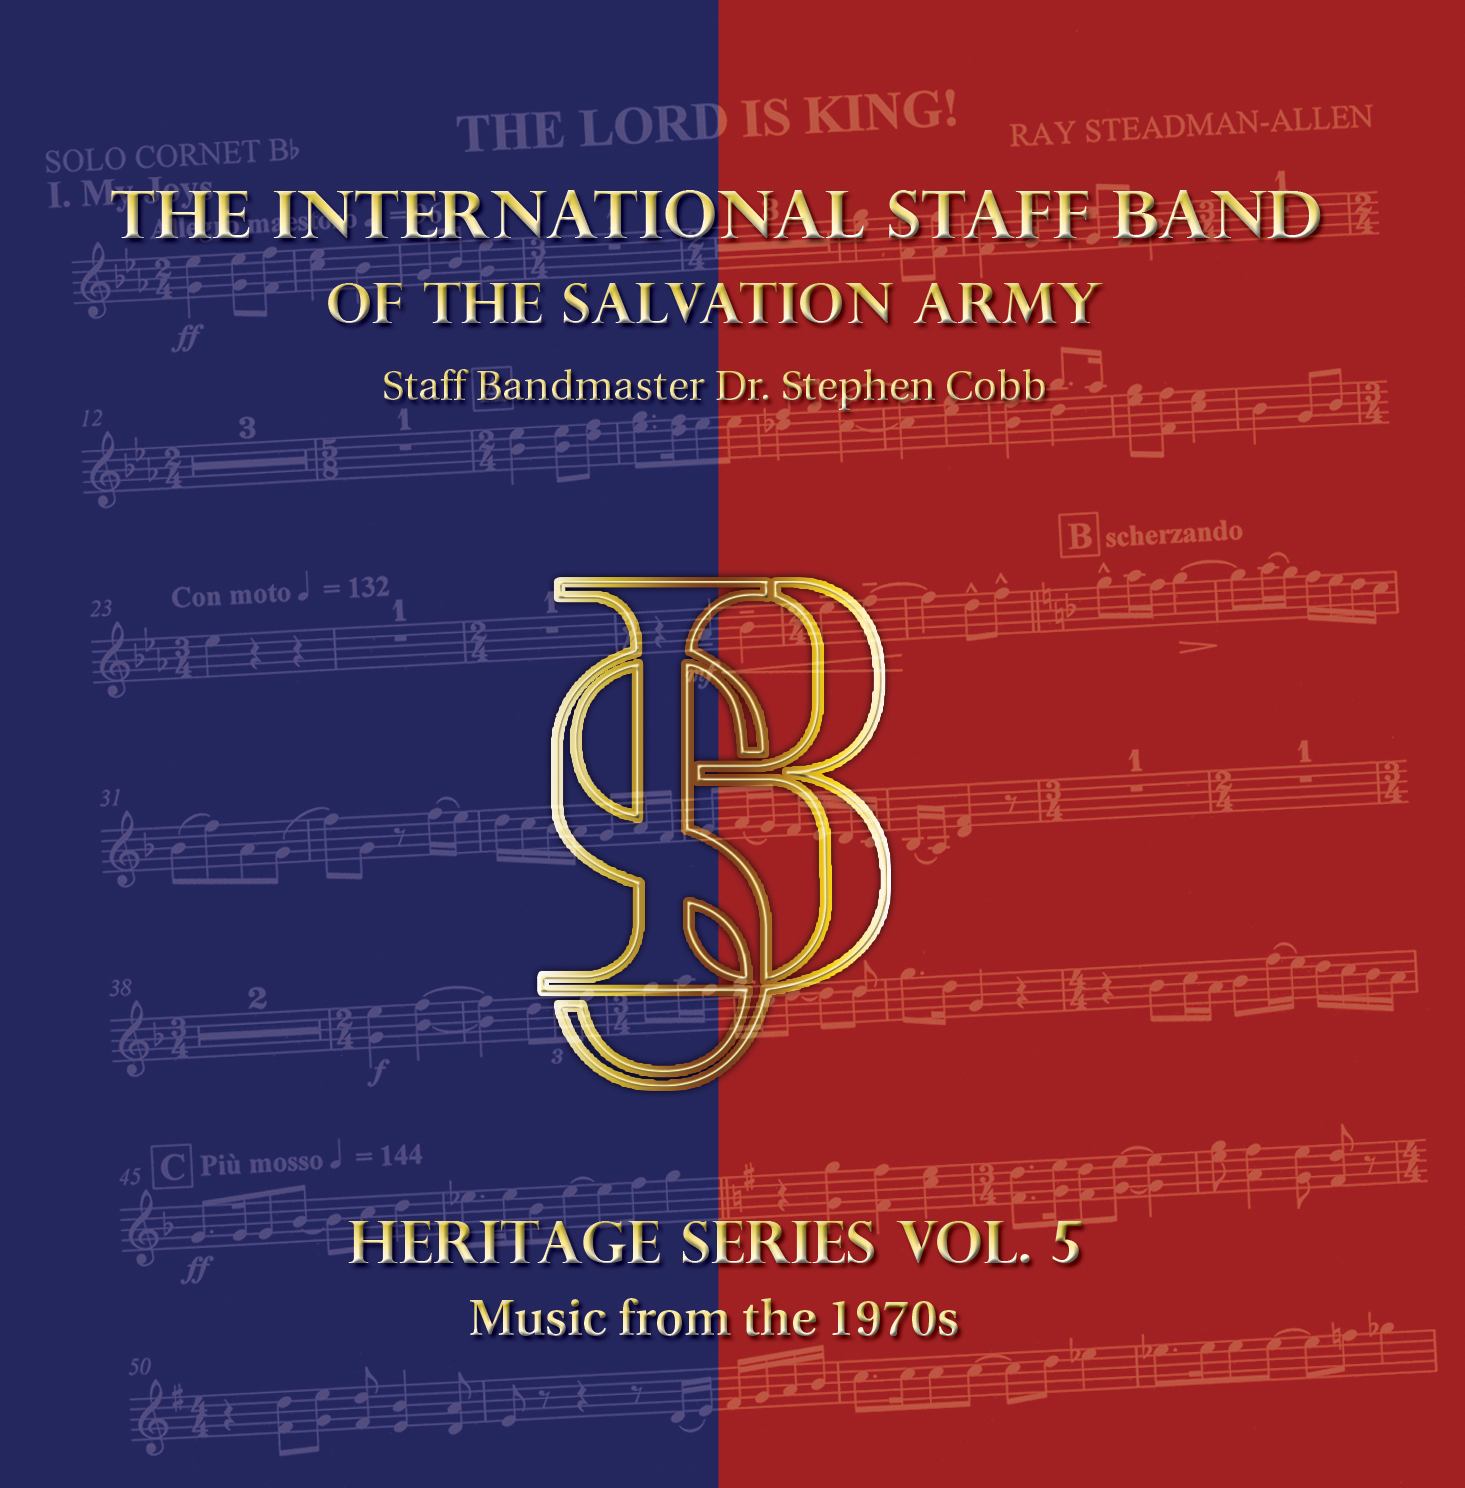 Heritage Series Vol. 5 - Music from the 1970s - Download